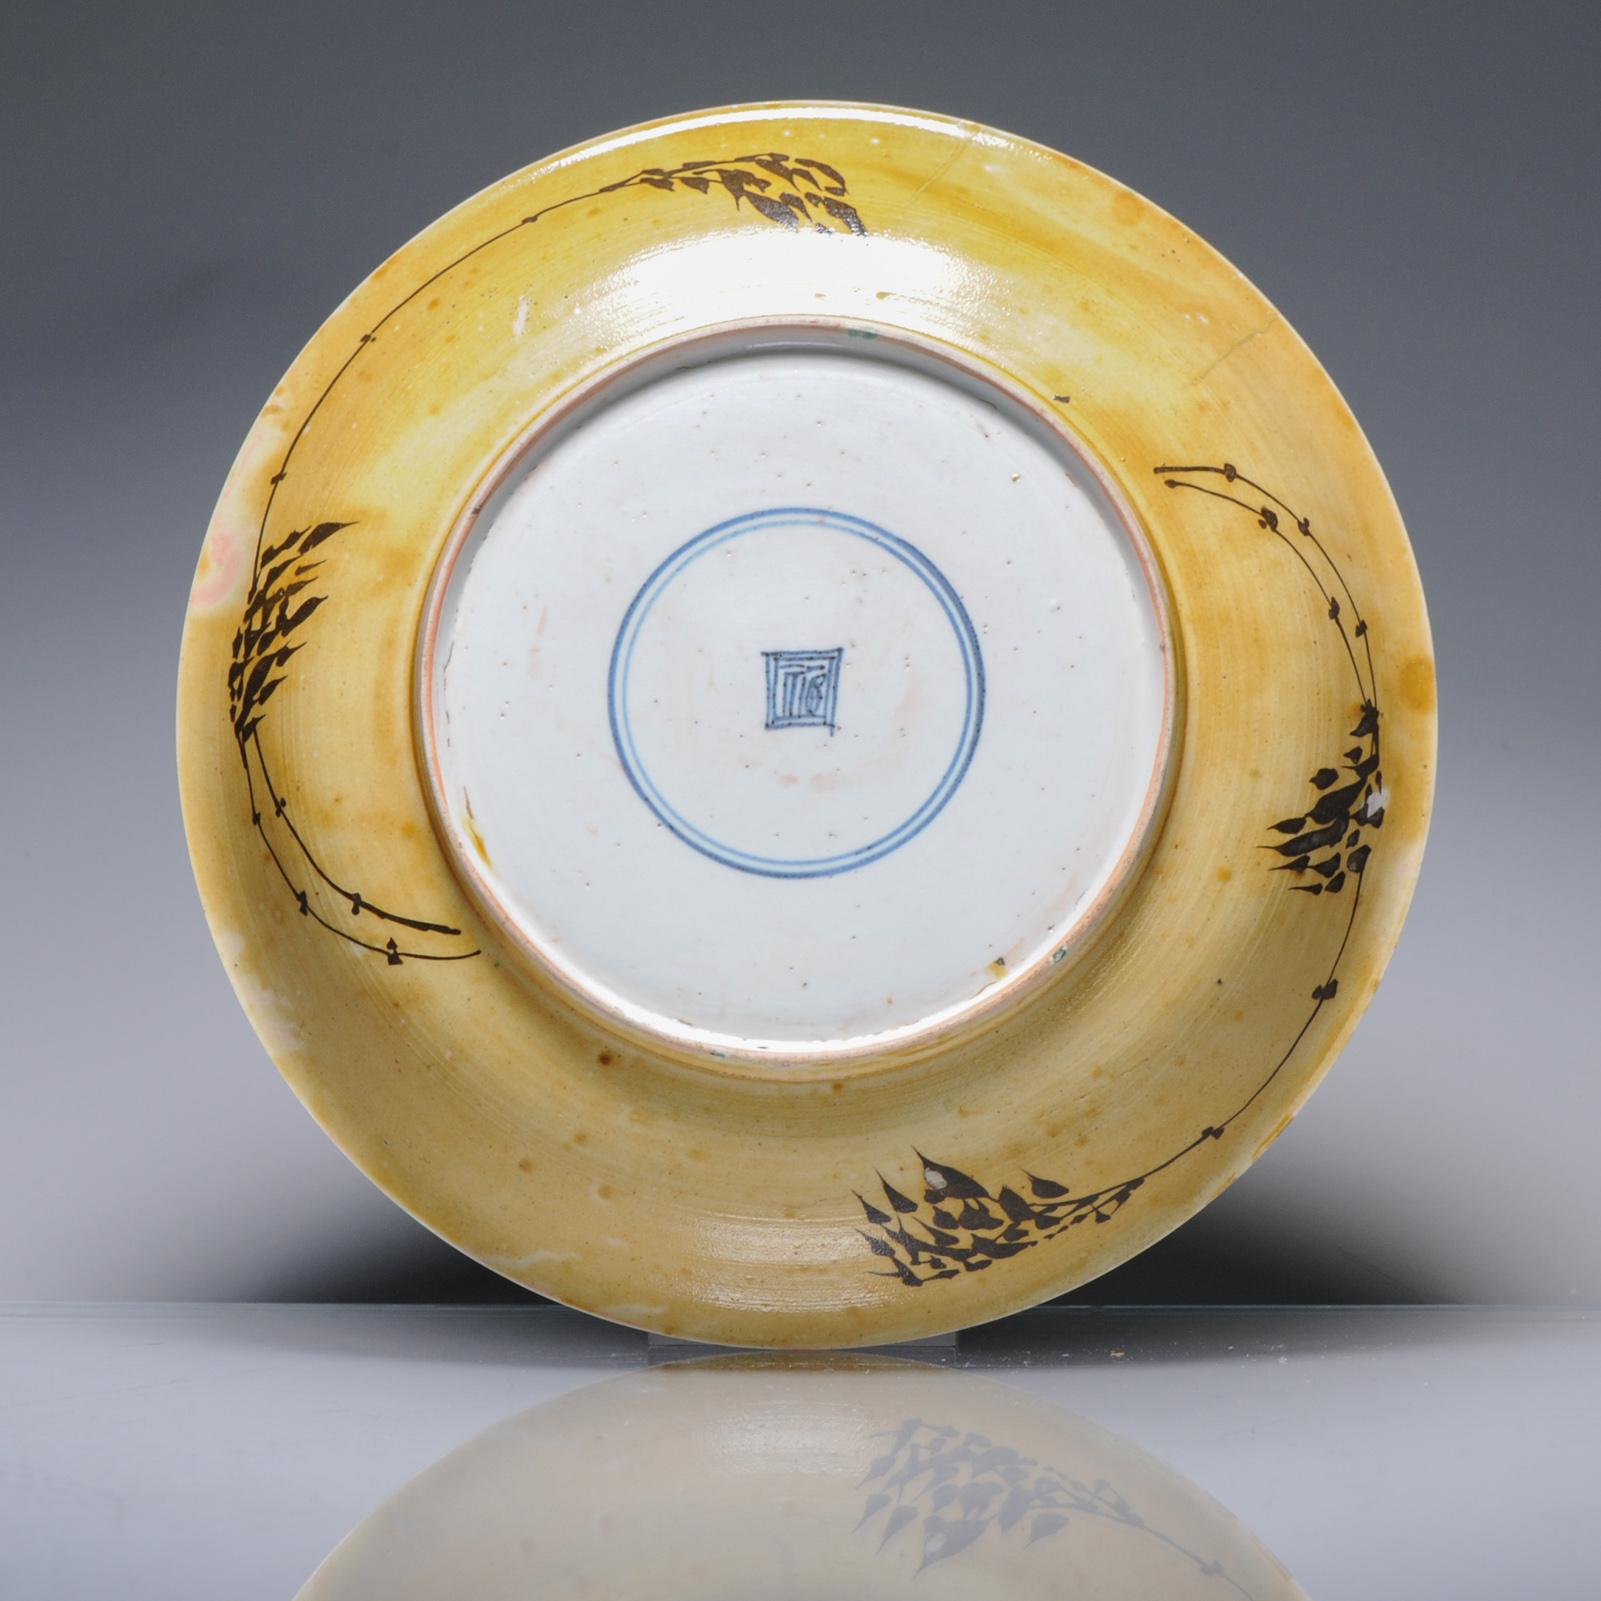 Kangxi period and amazing quality dish with different kind of flowers, trees and birds in verte palette on a black ground. Base with bamboo sprouts on yellow ground and a shop mark.

Additional information:
Material: Porcelain & Pottery
Region of